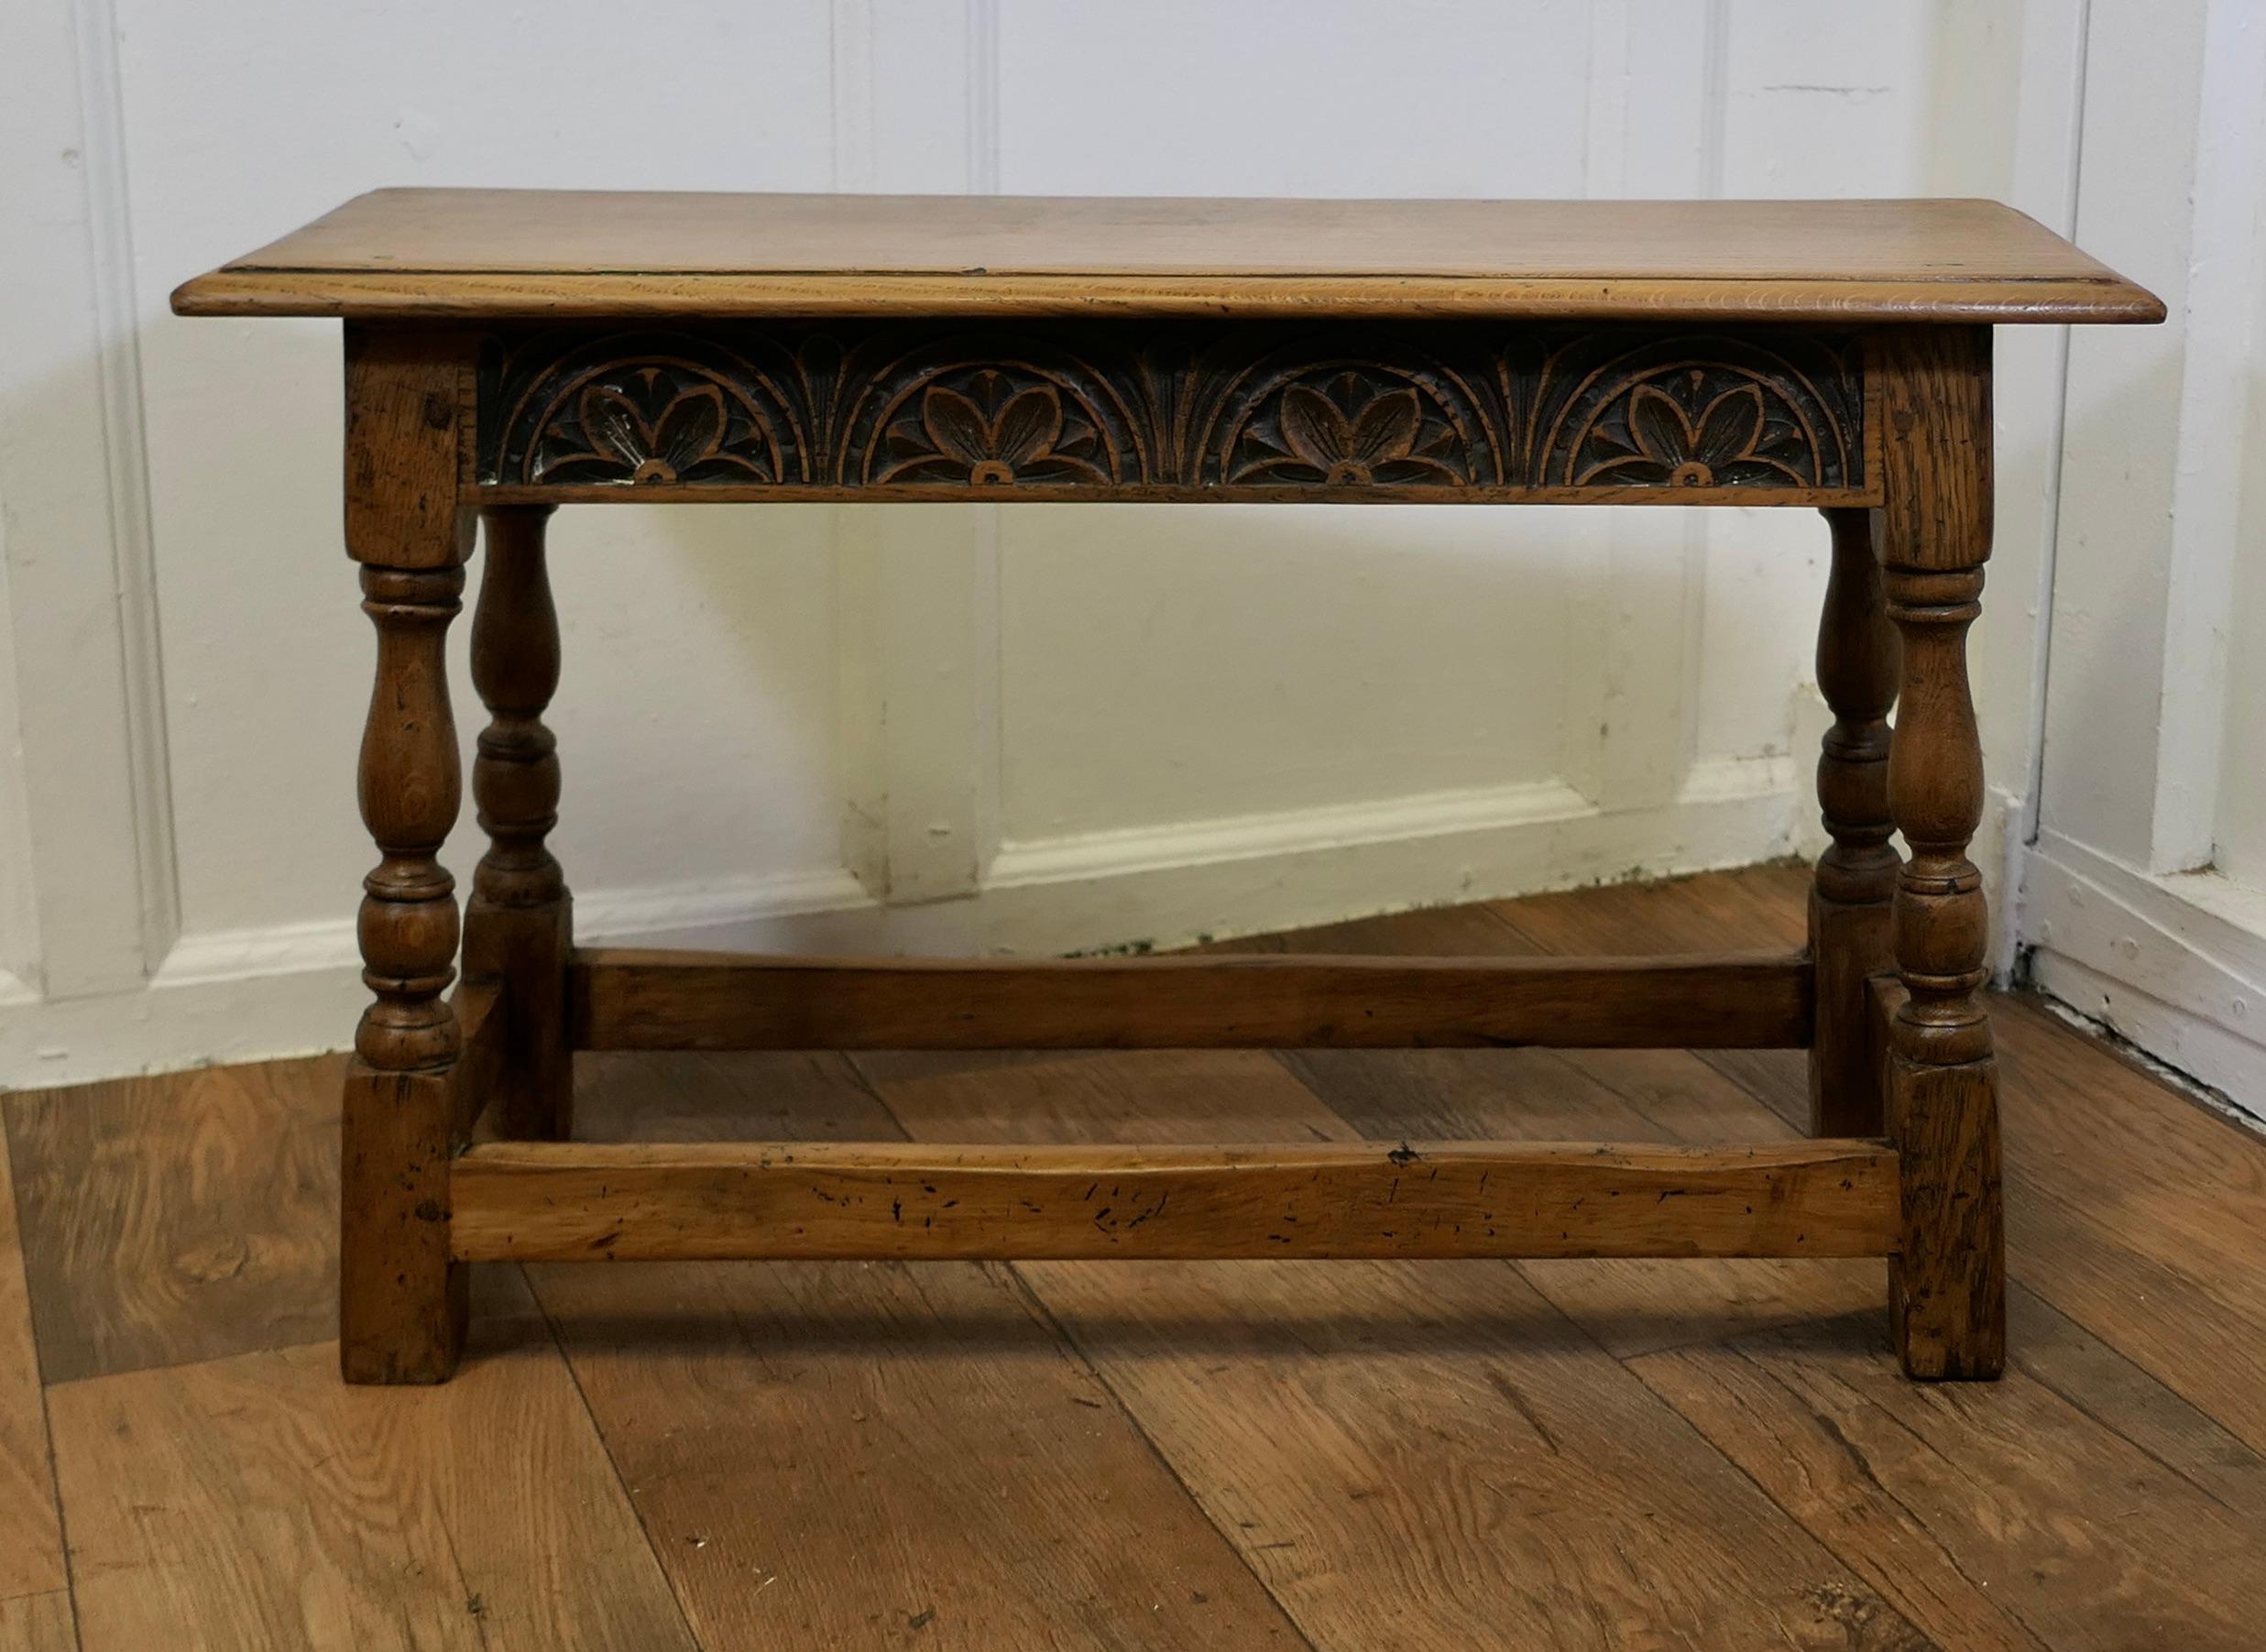 Arts and Crafts Carved Country Golden Oak Joint Style Window Seat, Hall Bench

This a good piece of Victorian Country Furniture, it has a solid Oak seat with a moulded edge and the apron below has decorative carving on all 4 sides, the stool stands